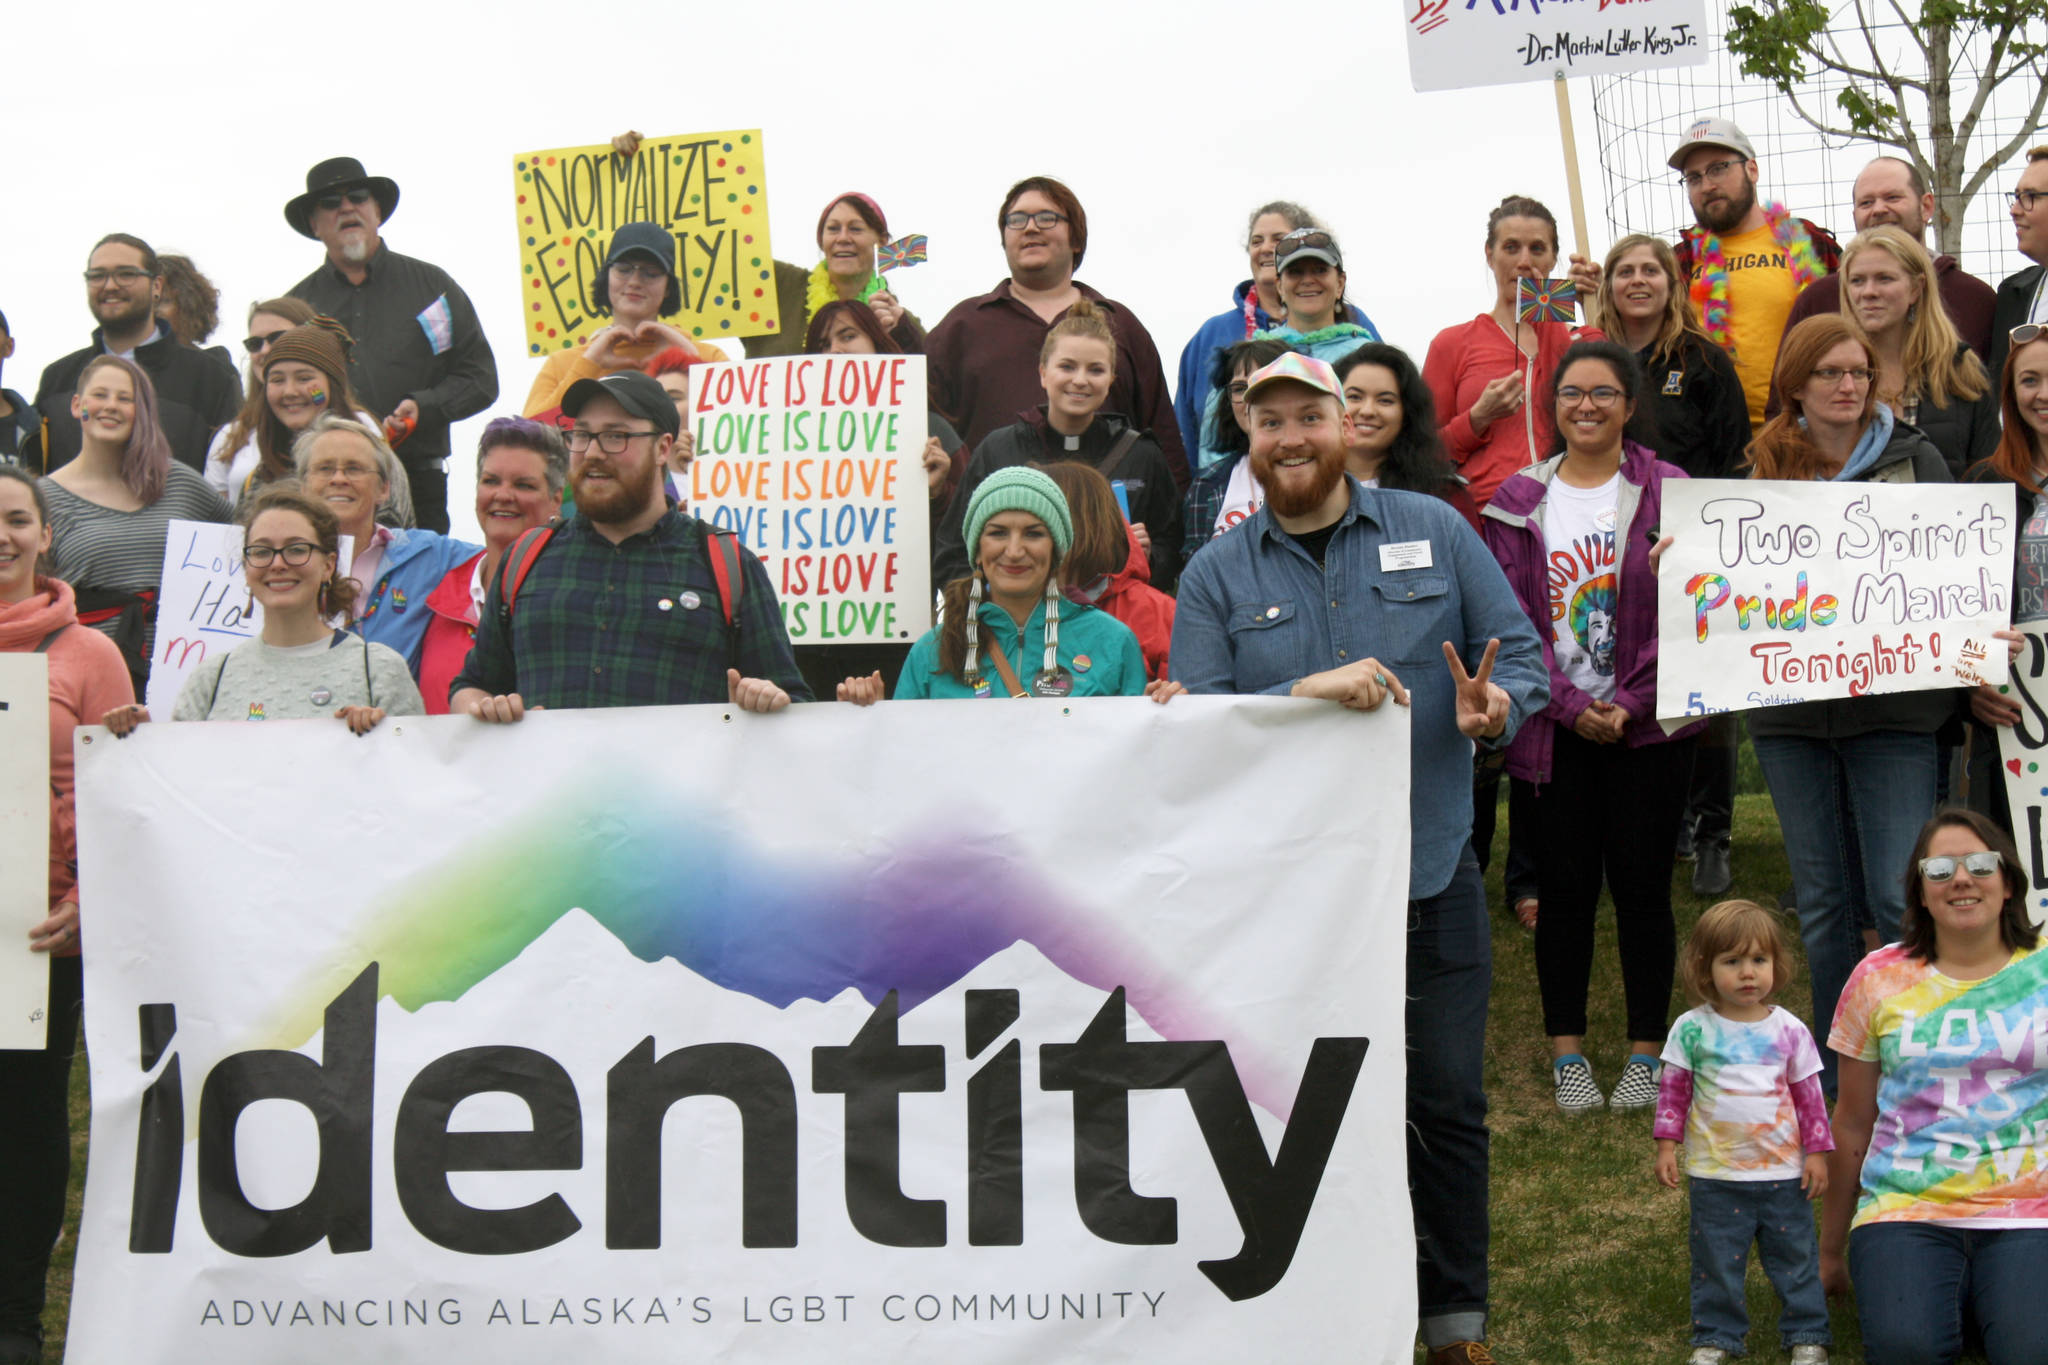 Participants in the Two Spirit Pride March gather at Soldotna Creek Park Wednesday. About 60 people turned out to celebrate June LGBTQ Pride Month. (Photo by Erin Thompson/Peninsula Clarion)